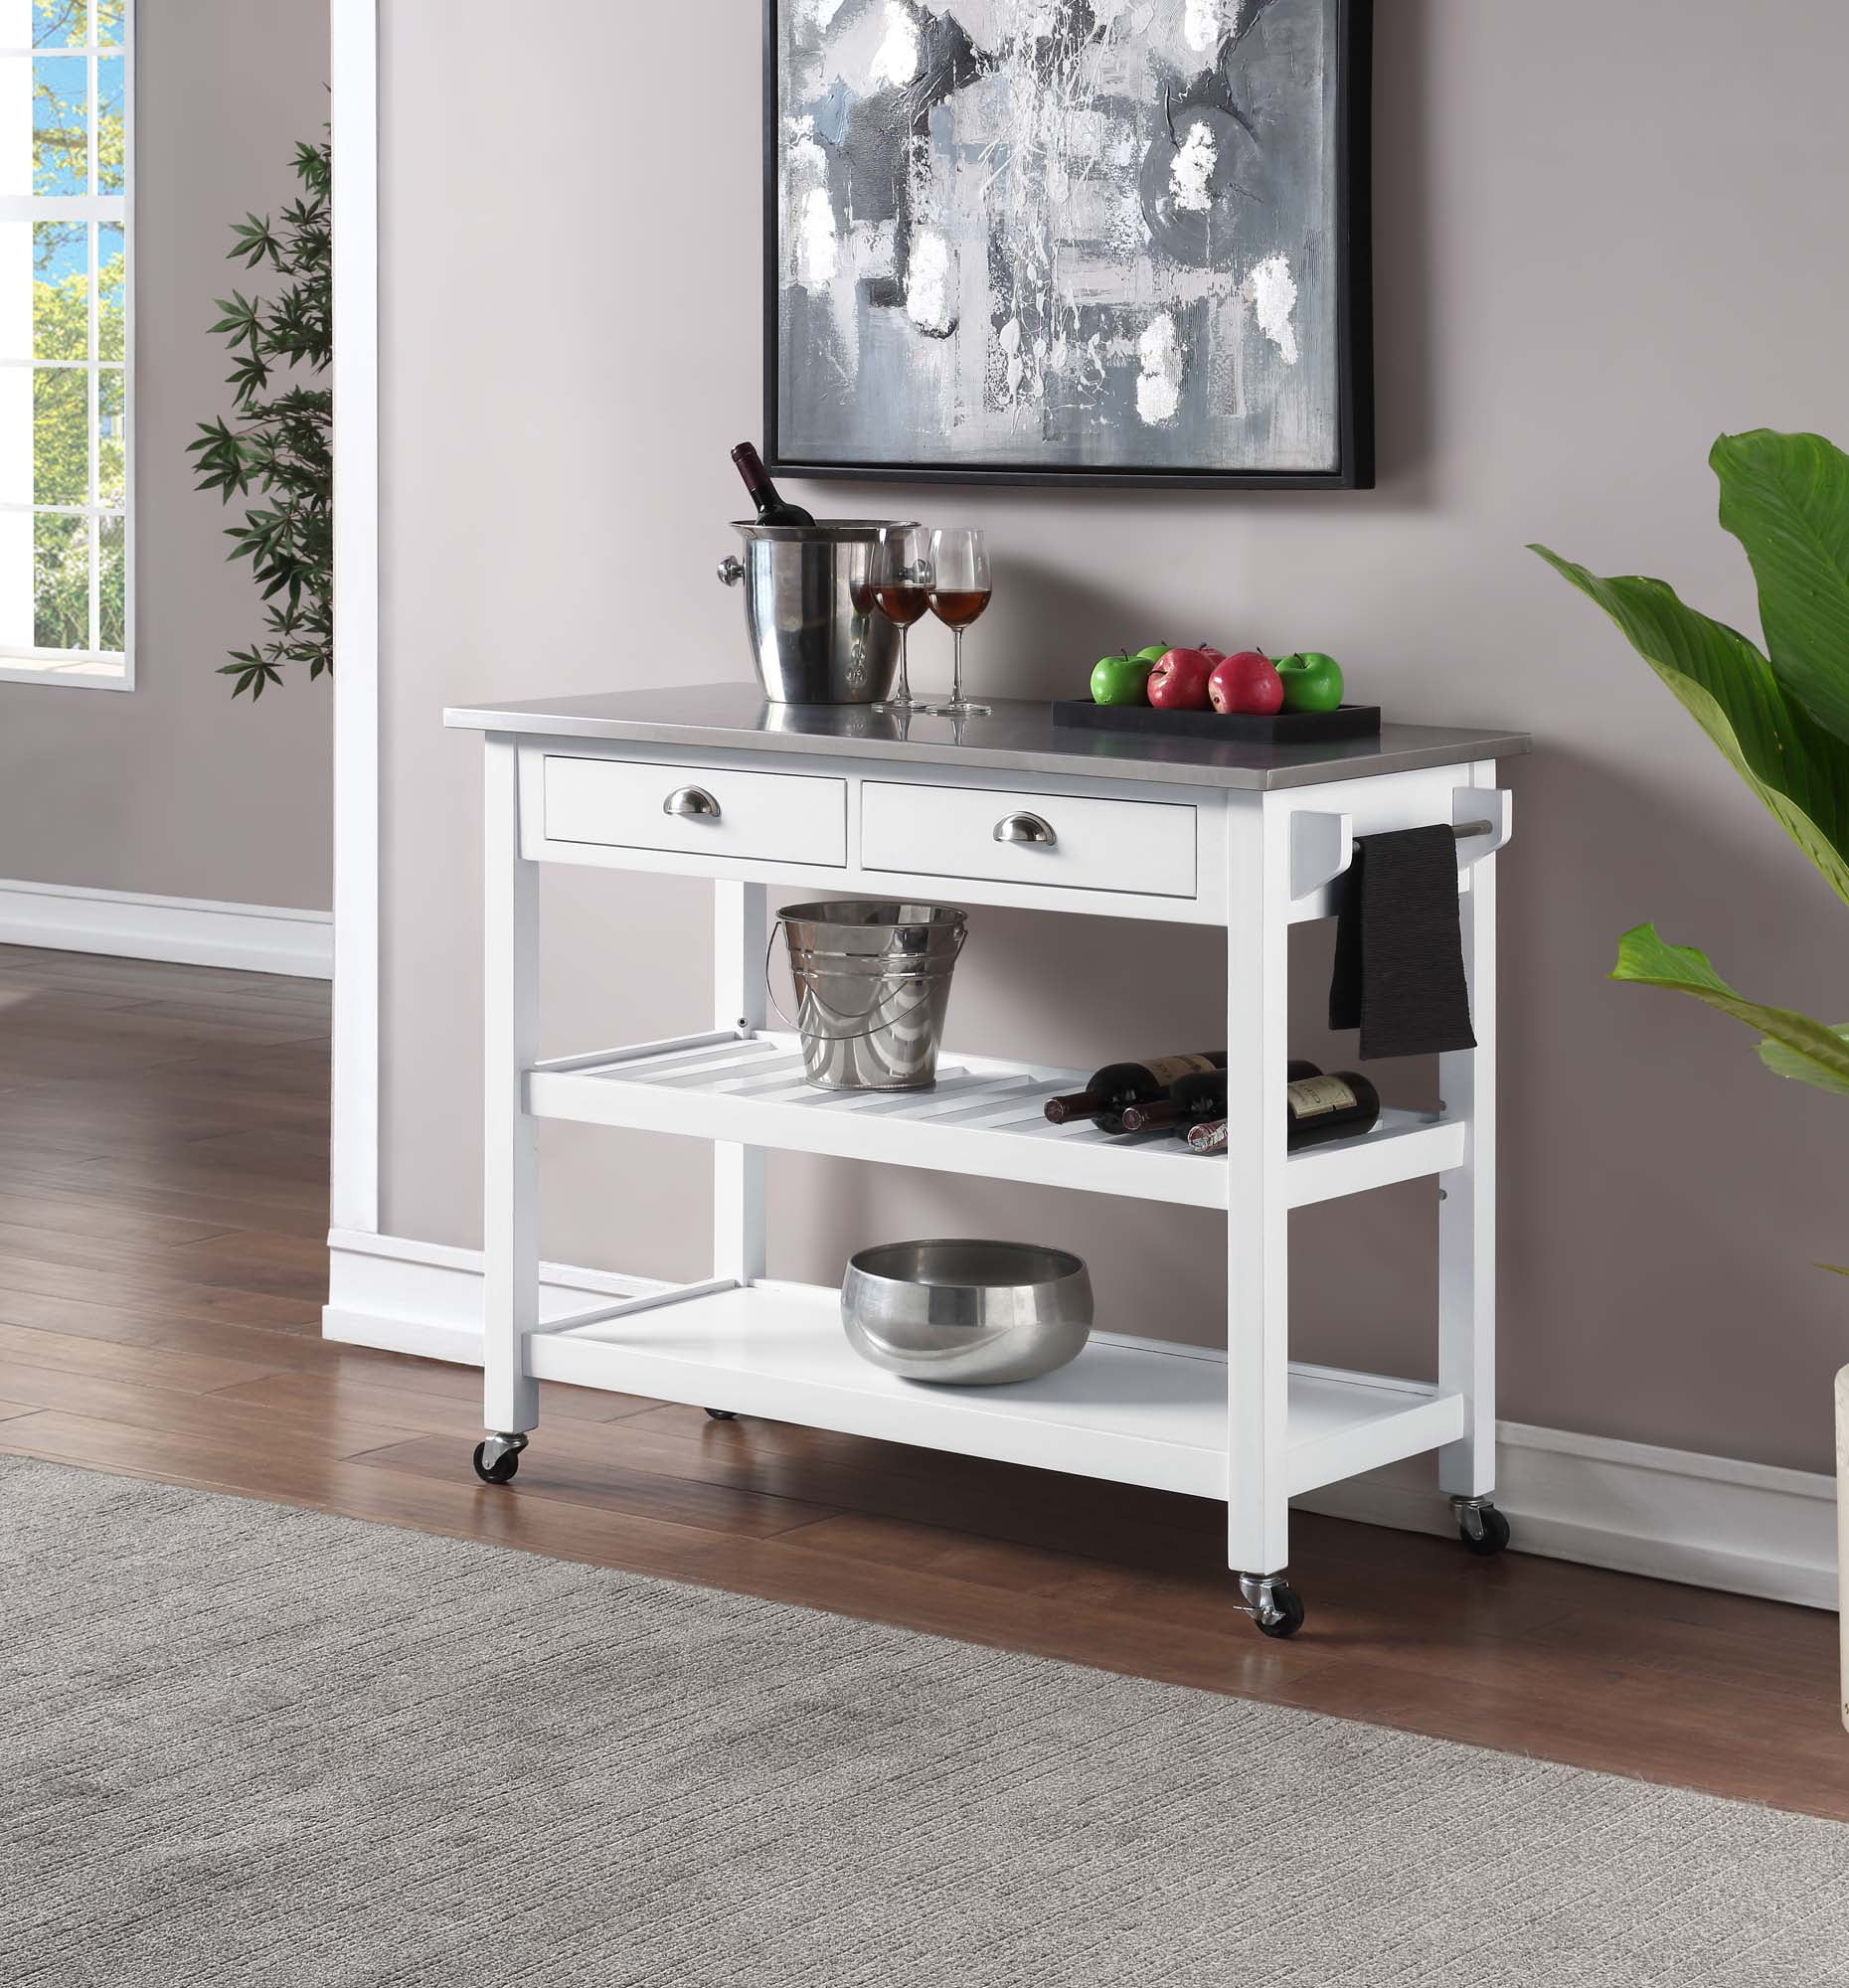 Picture of Convenience Concepts 802240W American Heritage 3 Tier Stainless Steel Kitchen Cart with Drawers - Stainless Steel/White